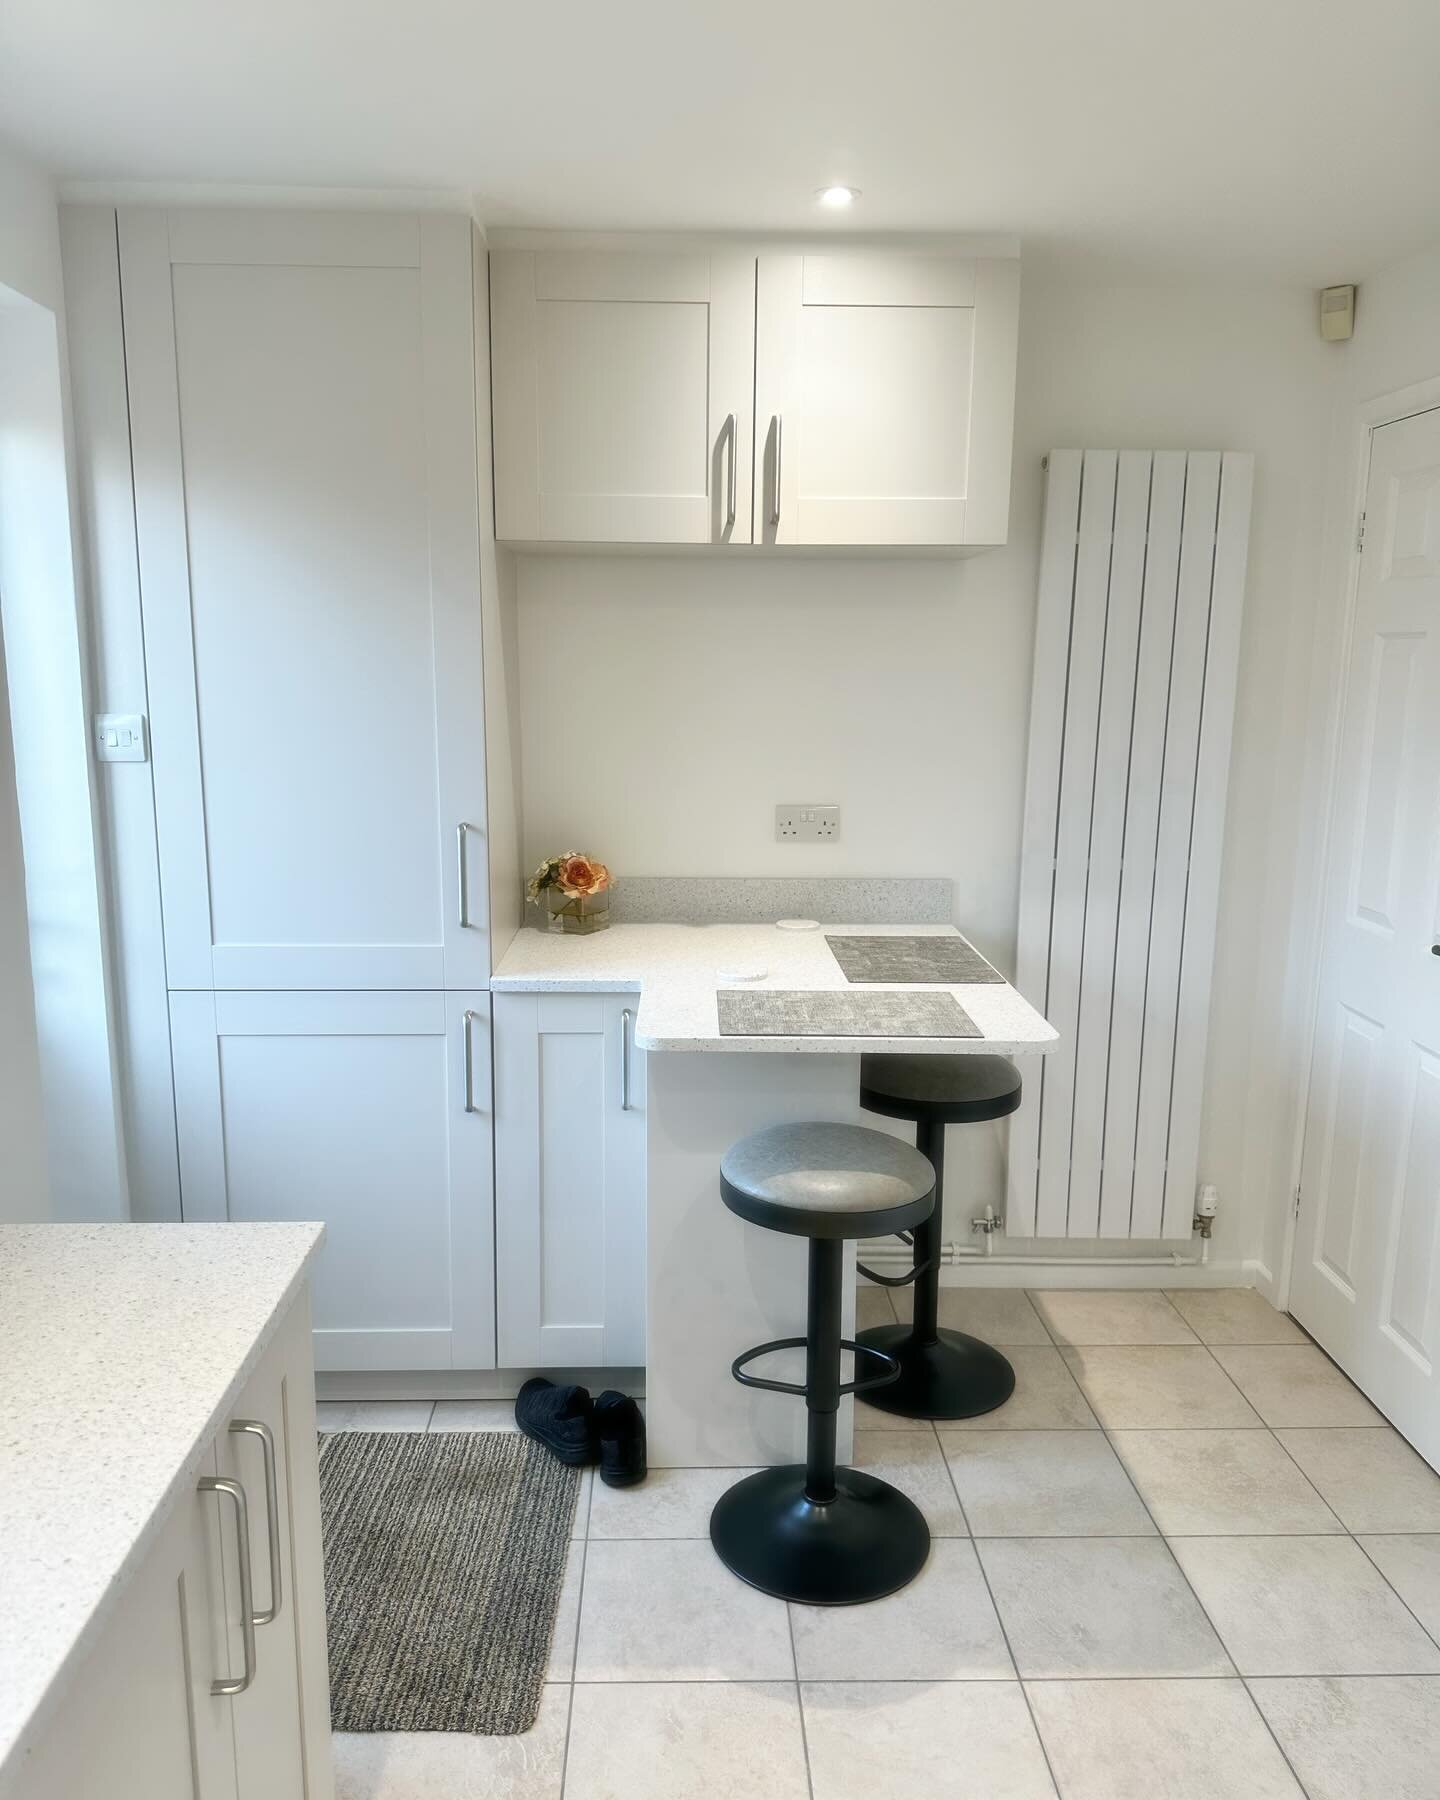 Our long standing client approached us to revamp their kitchen and add a breakfast bar area. Clever design was needed to make the most of the space which was impeded by several doors. We kept to a light colour scheme and used Corian for the worktops 